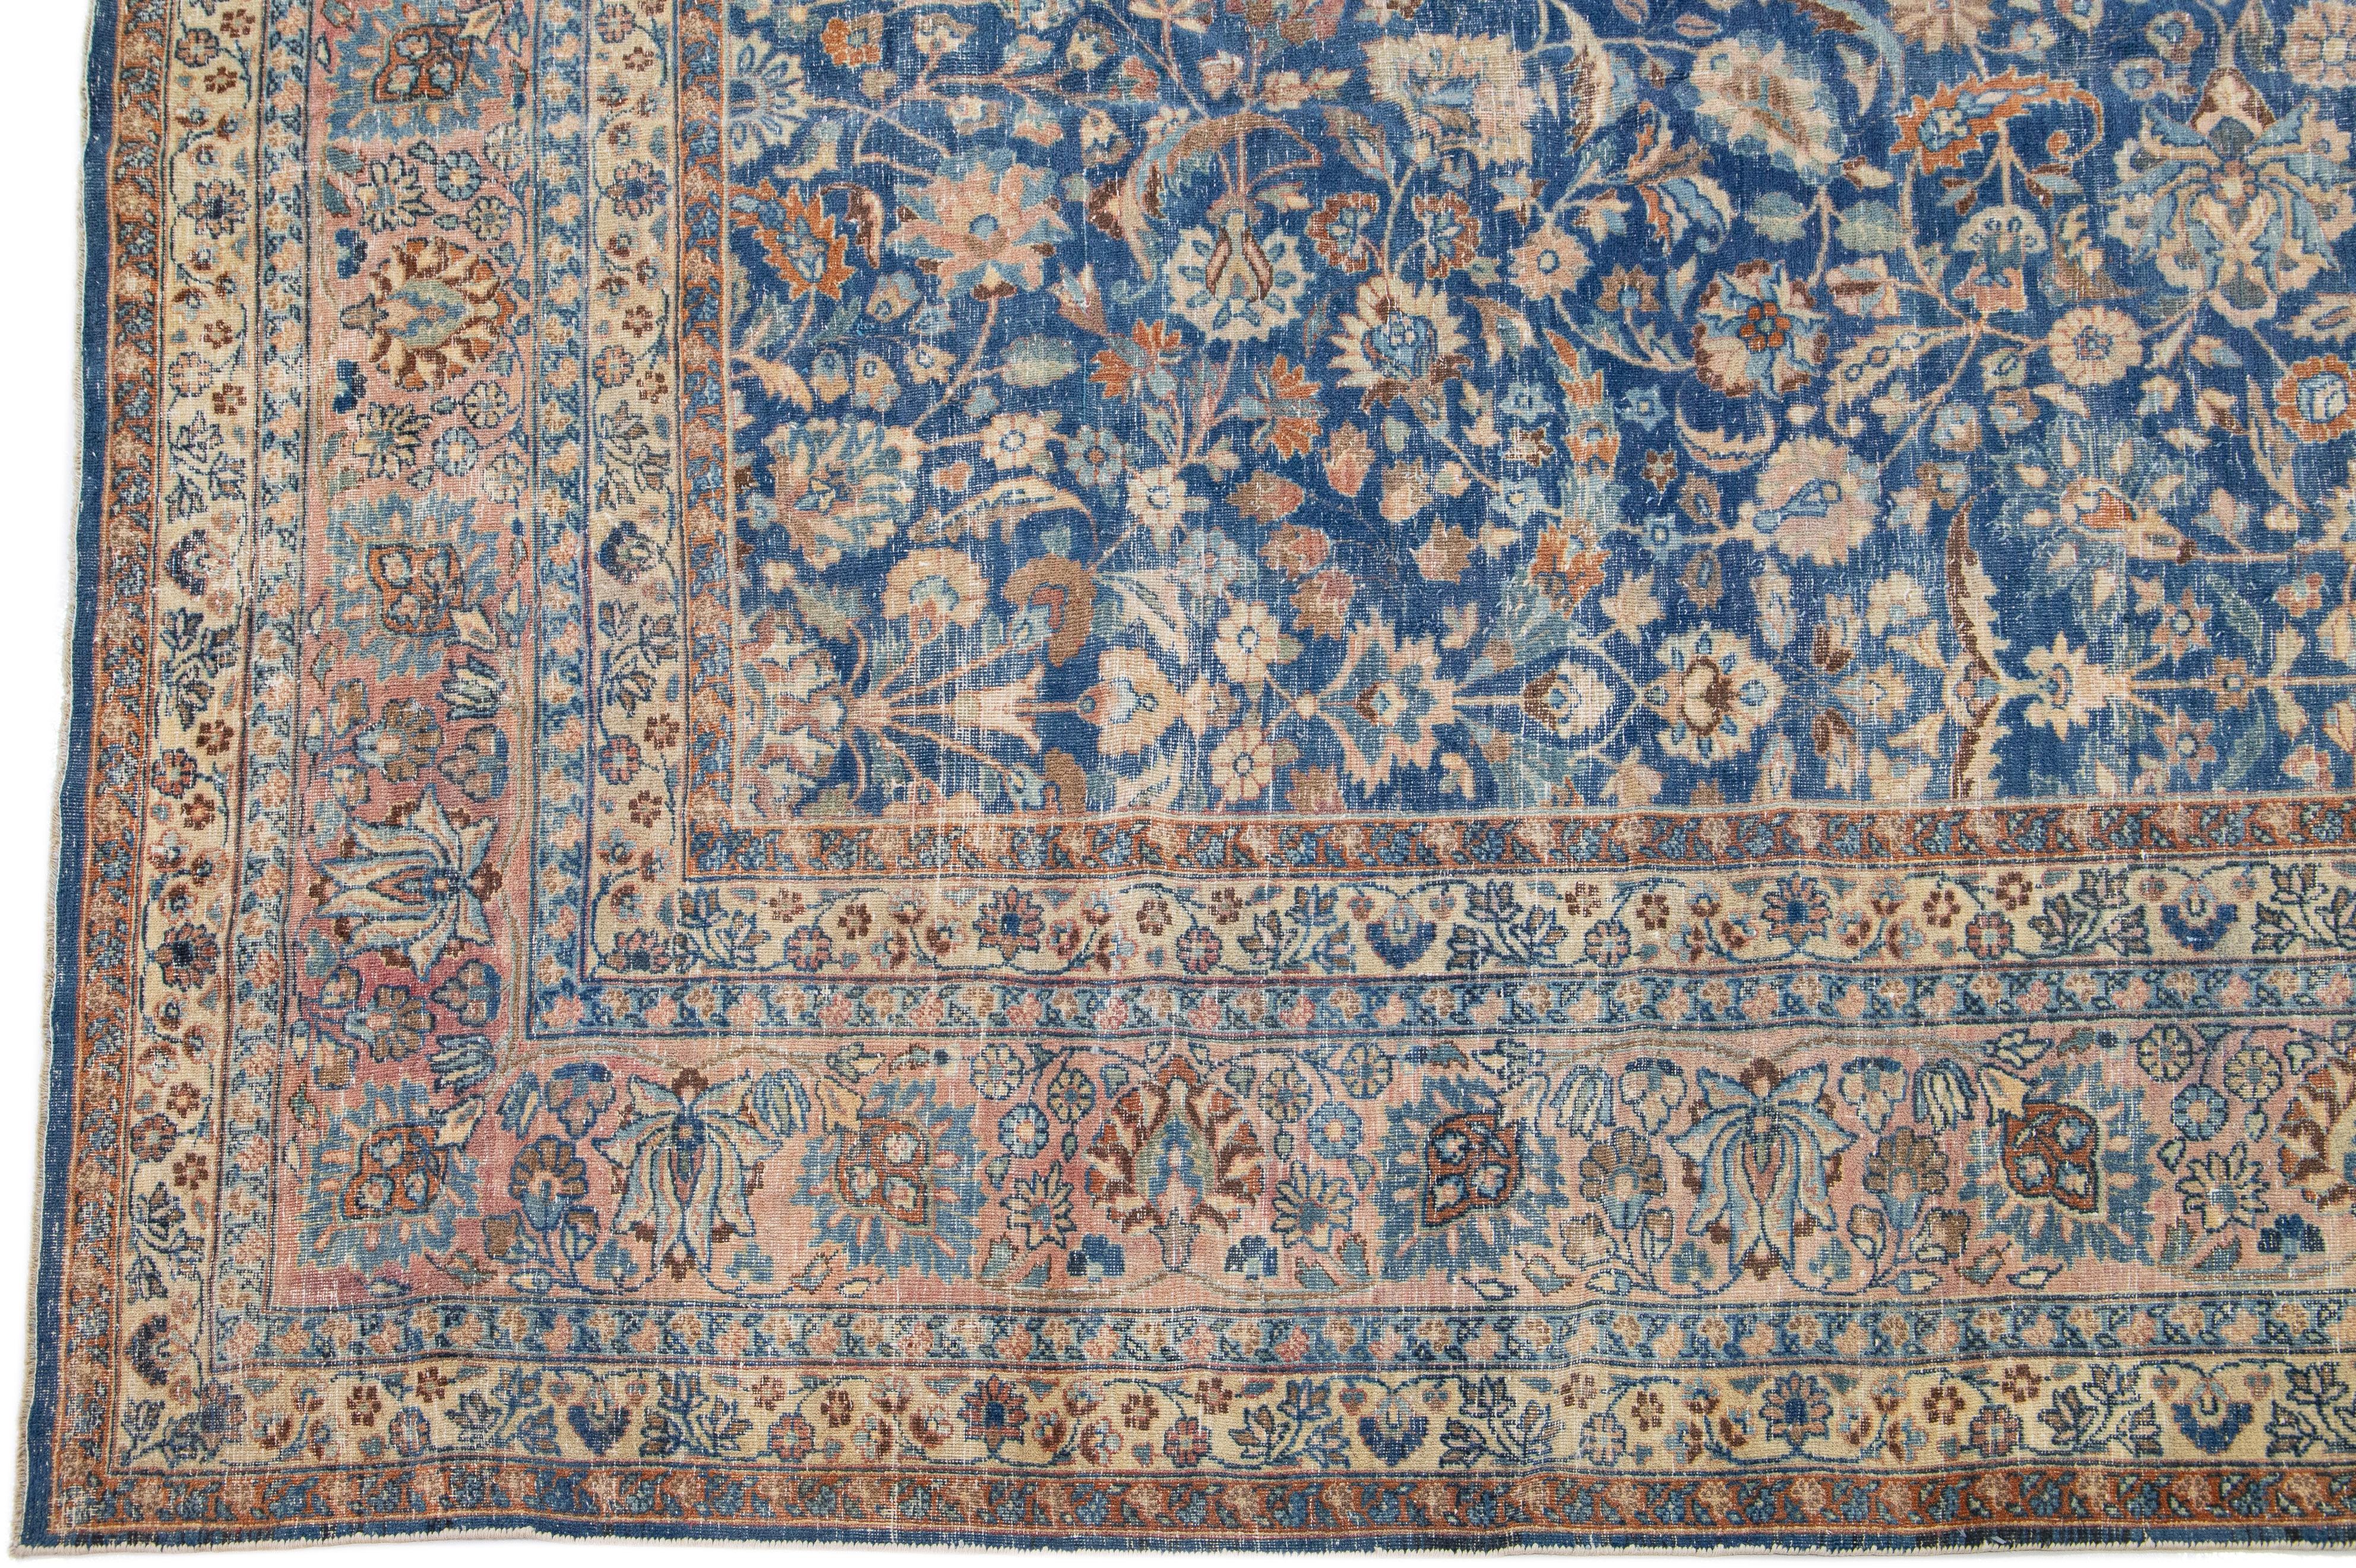 Oversize Handmade Floral Persian Mashad Wool Rug in Blue In Good Condition For Sale In Norwalk, CT